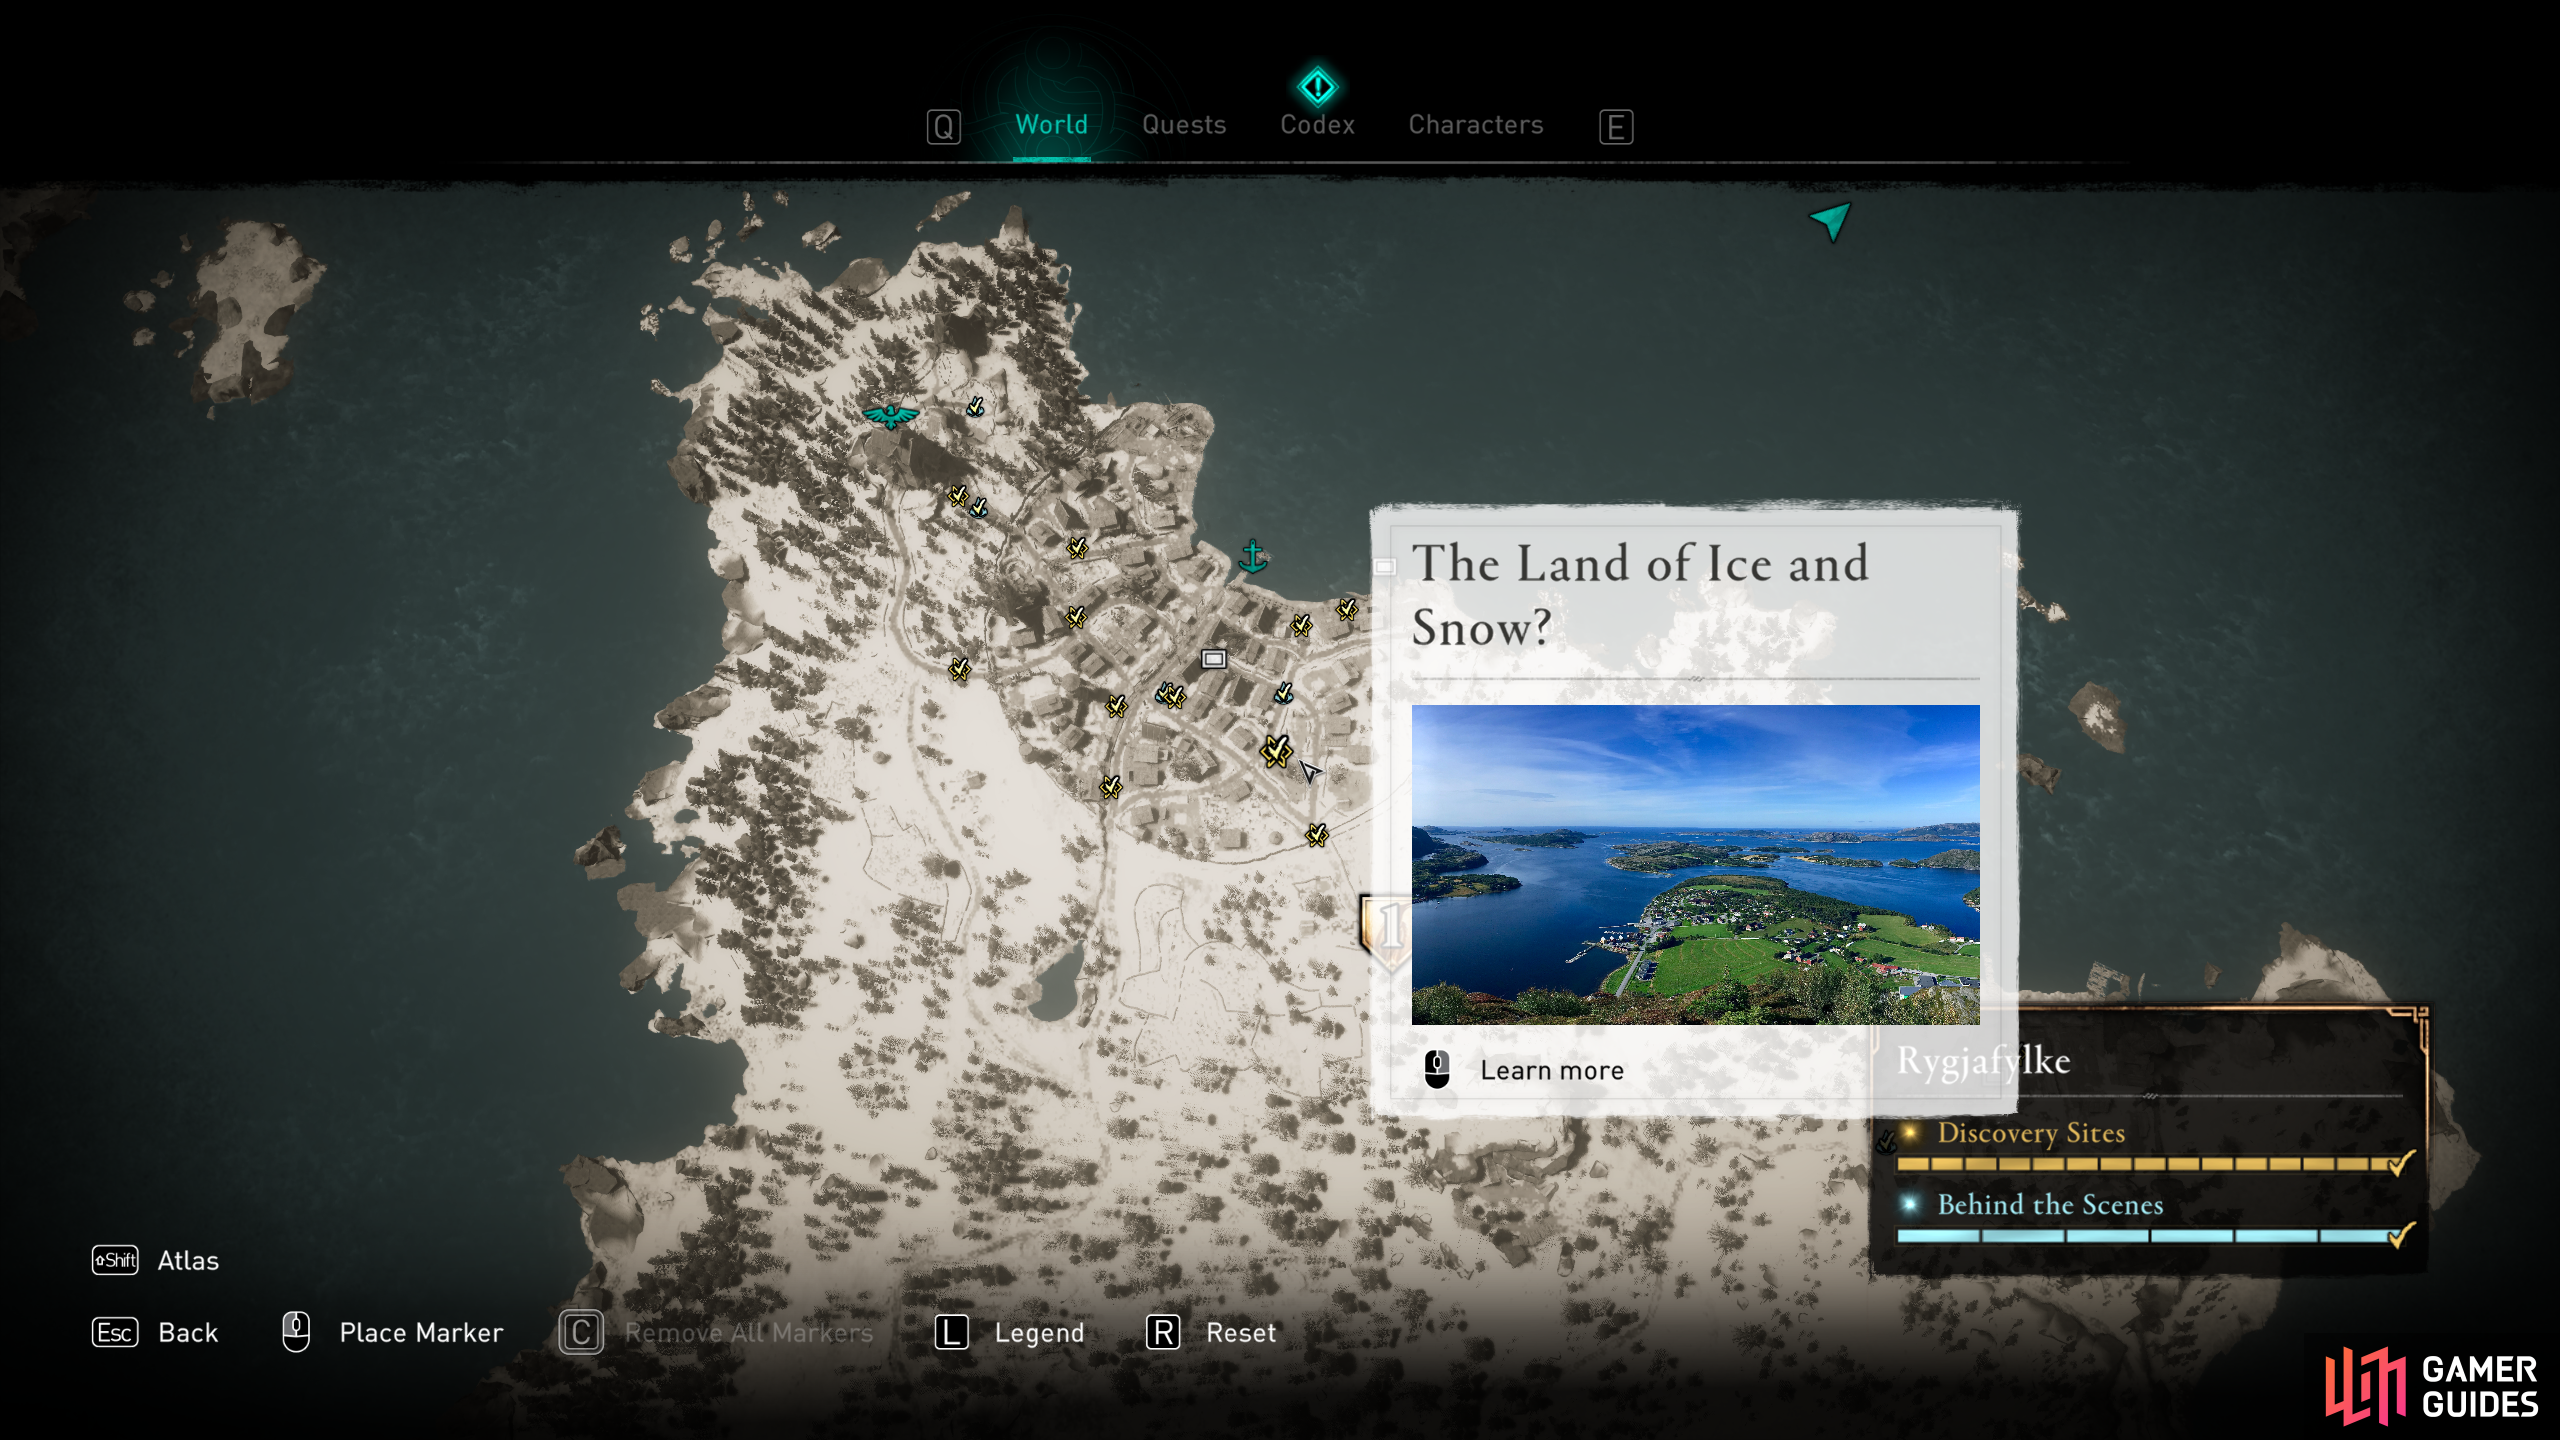 You'll find Discovery Sites throughout the map, marked as gold icons.